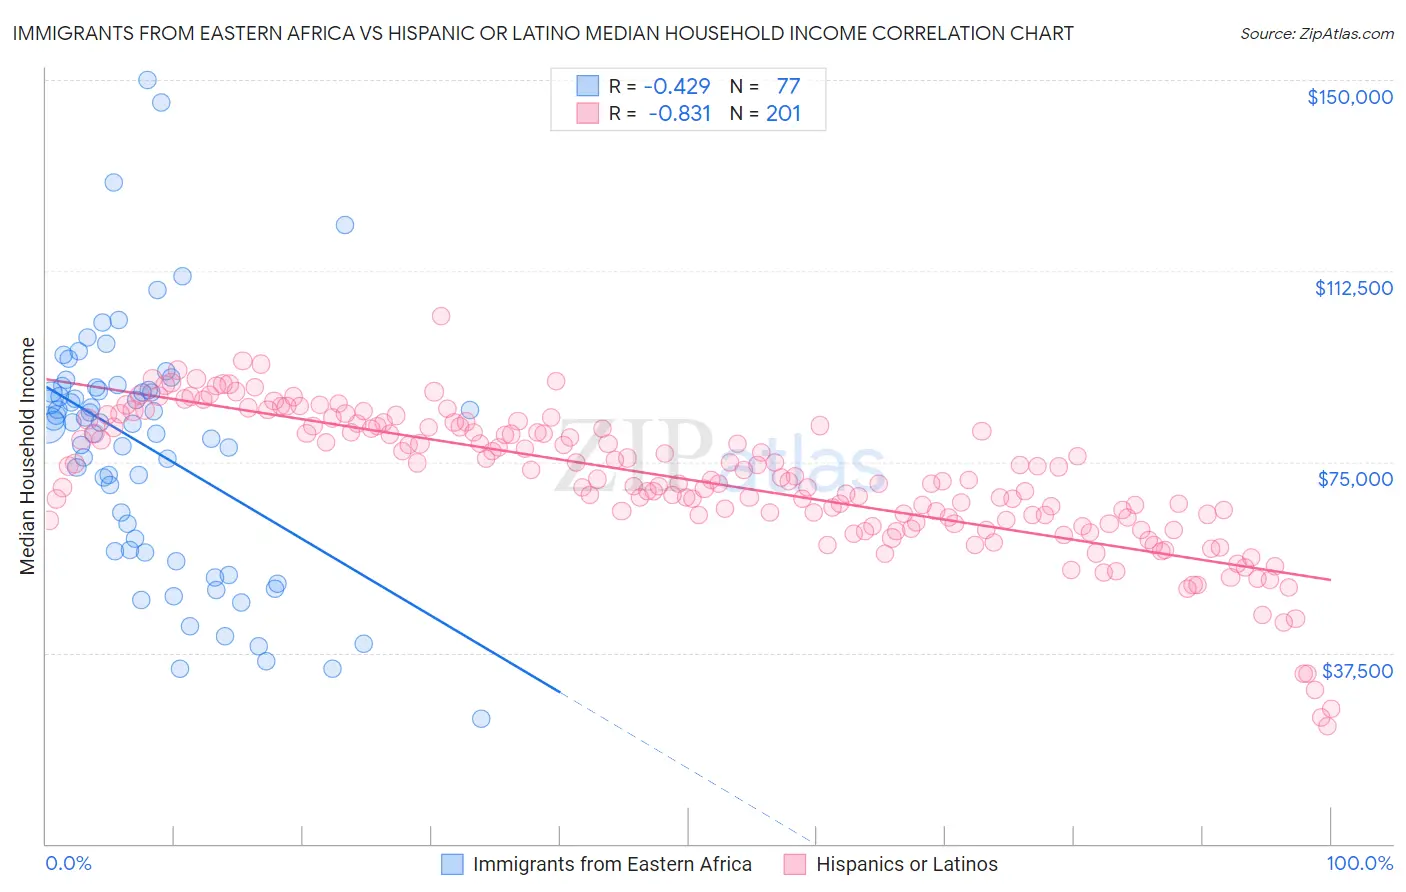 Immigrants from Eastern Africa vs Hispanic or Latino Median Household Income